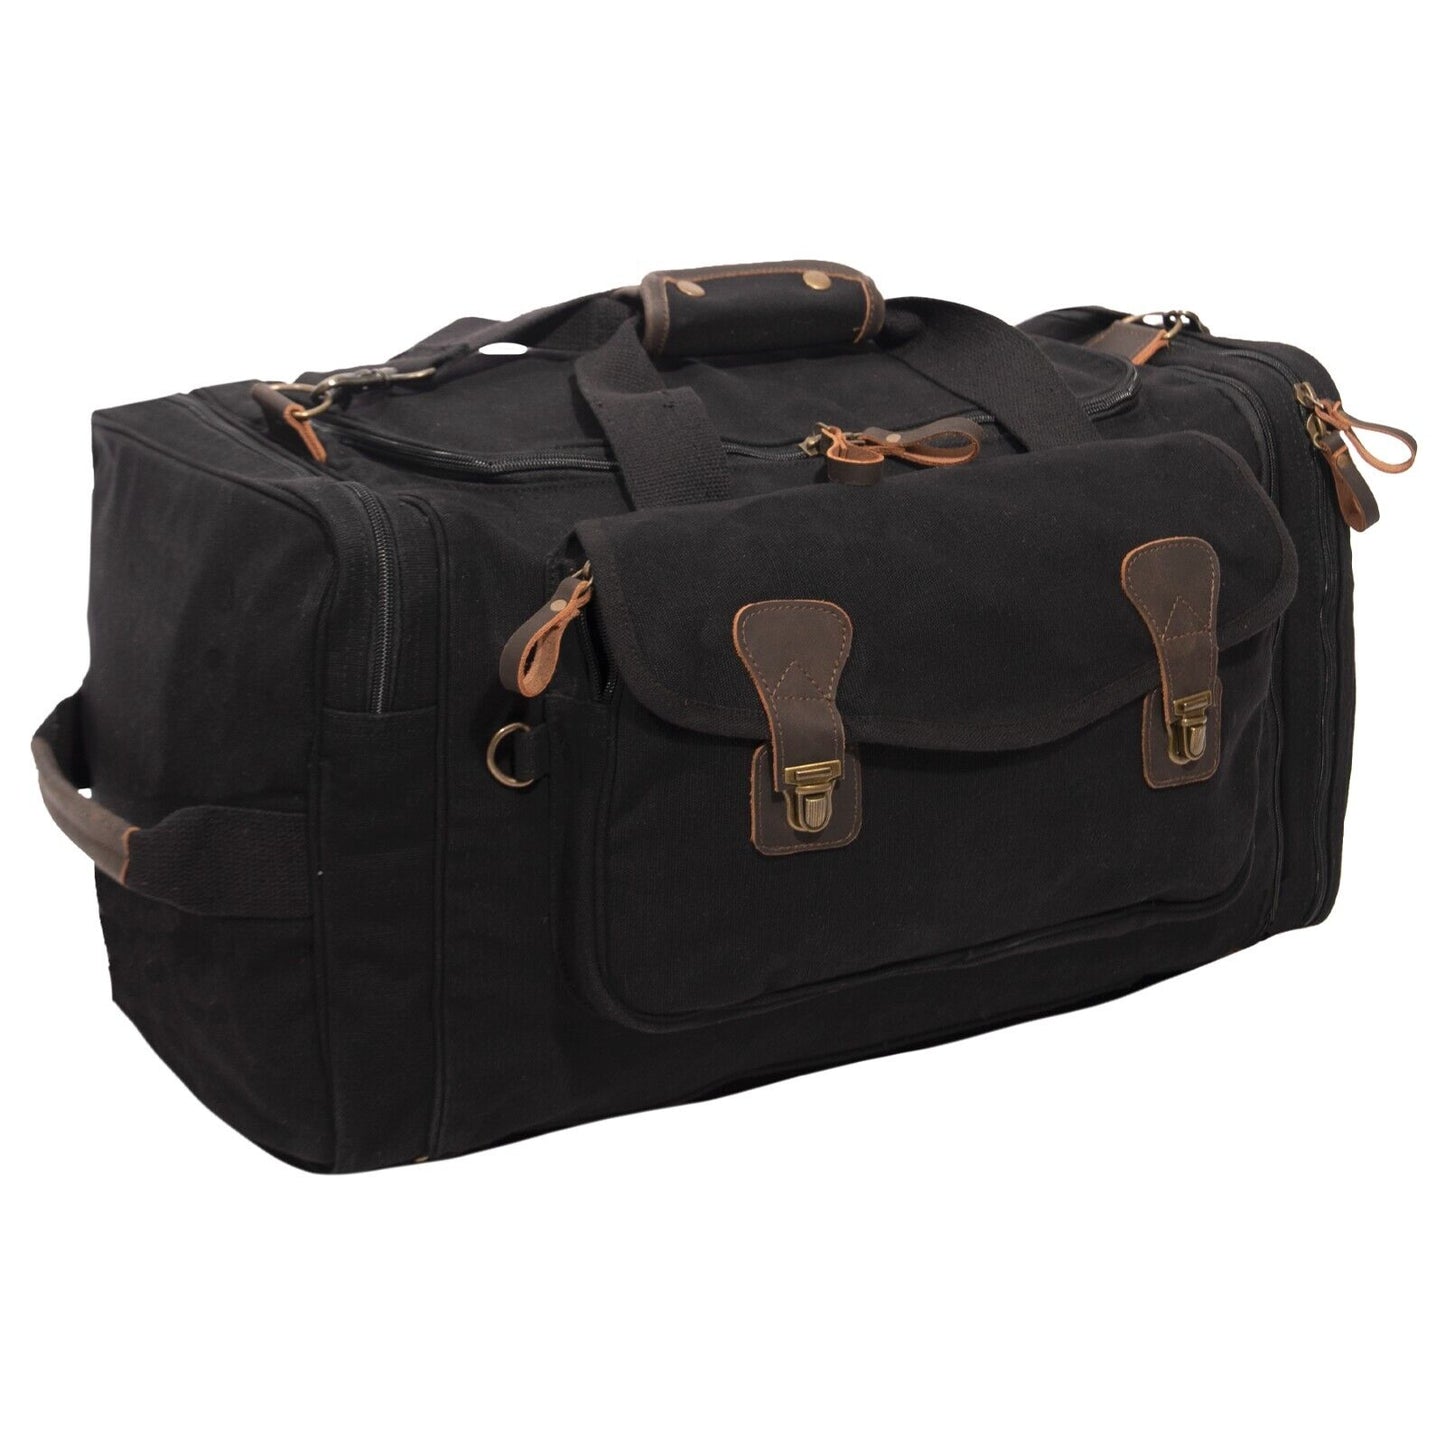 Black & Brown Canvas Extended Stay Travel Duffle Bag Rucksack Backpack Carry-On